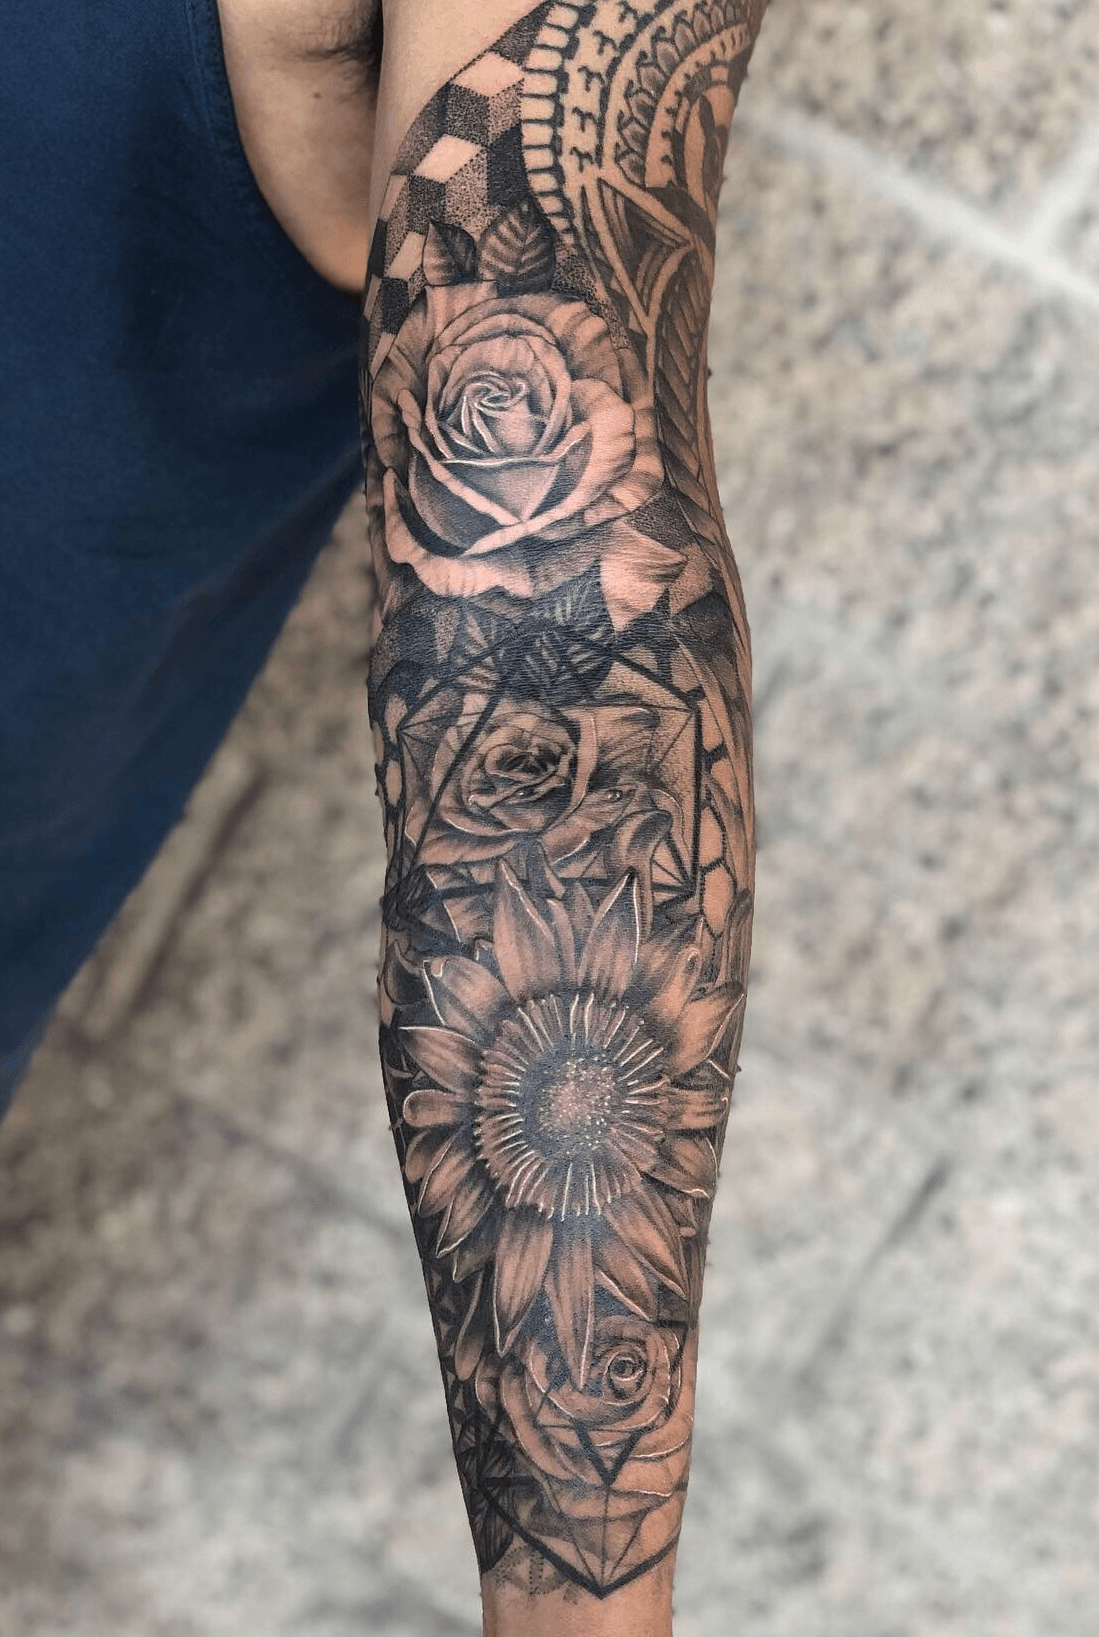 Tattoo uploaded by Rick Levenchuck  A little mixed style floral floral  floraltattoo linework lineworktattoo realism realistictattoo  blackandgrey blackandgreytattoo girlswithtattoos knoxville  knoxvilletattoo  Tattoodo